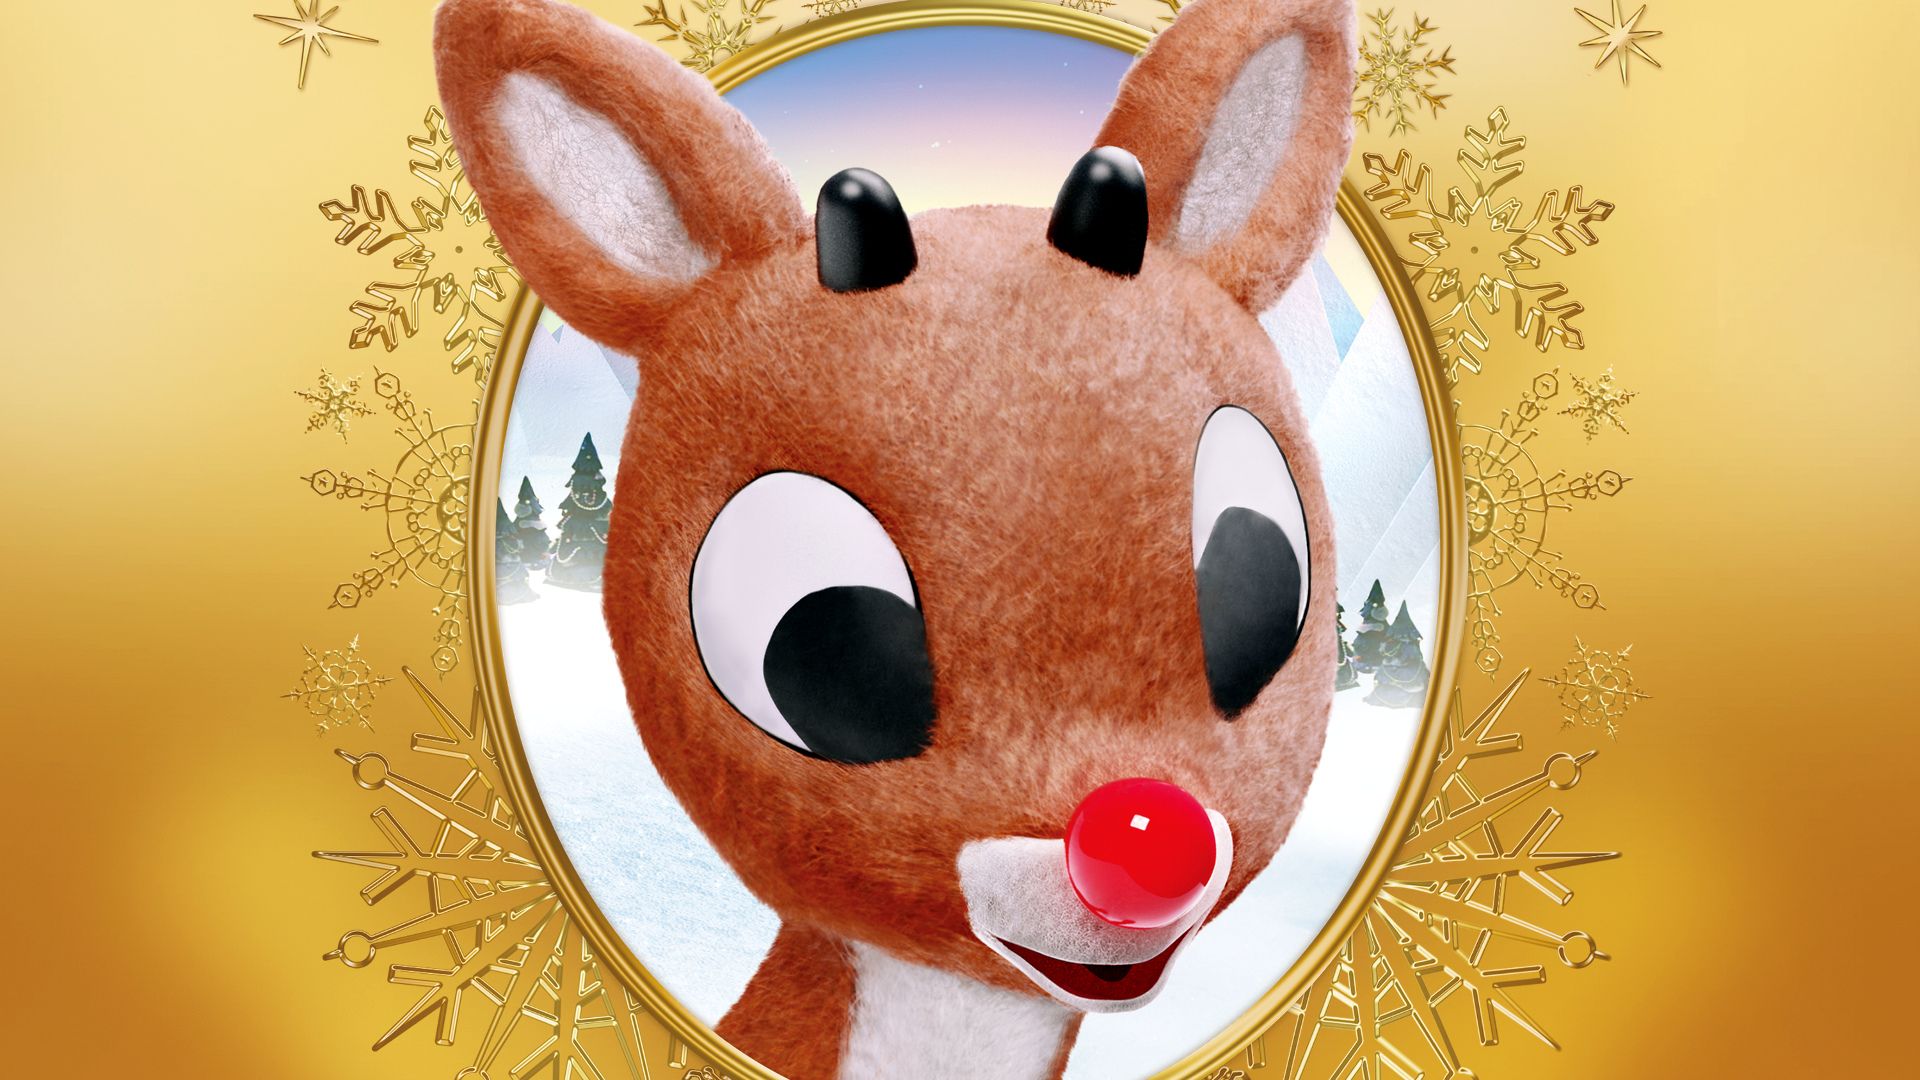 Rudolph the Red-Nosed Reindeer background